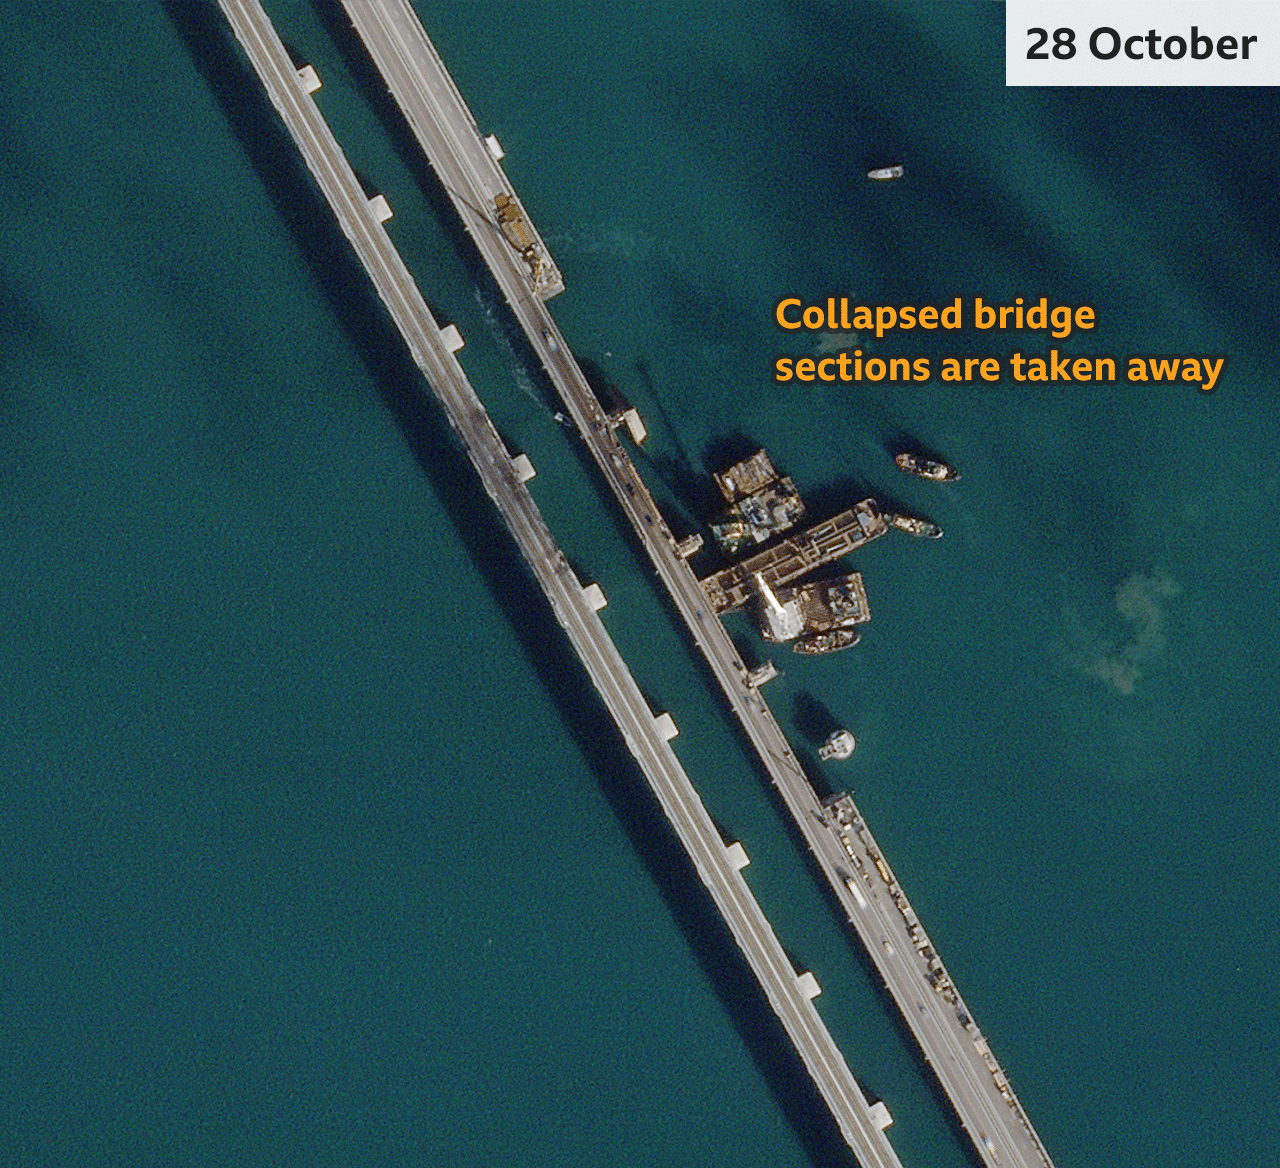 On 19 October, three barges carrying cranes can be seen floating near the damaged bridge sections